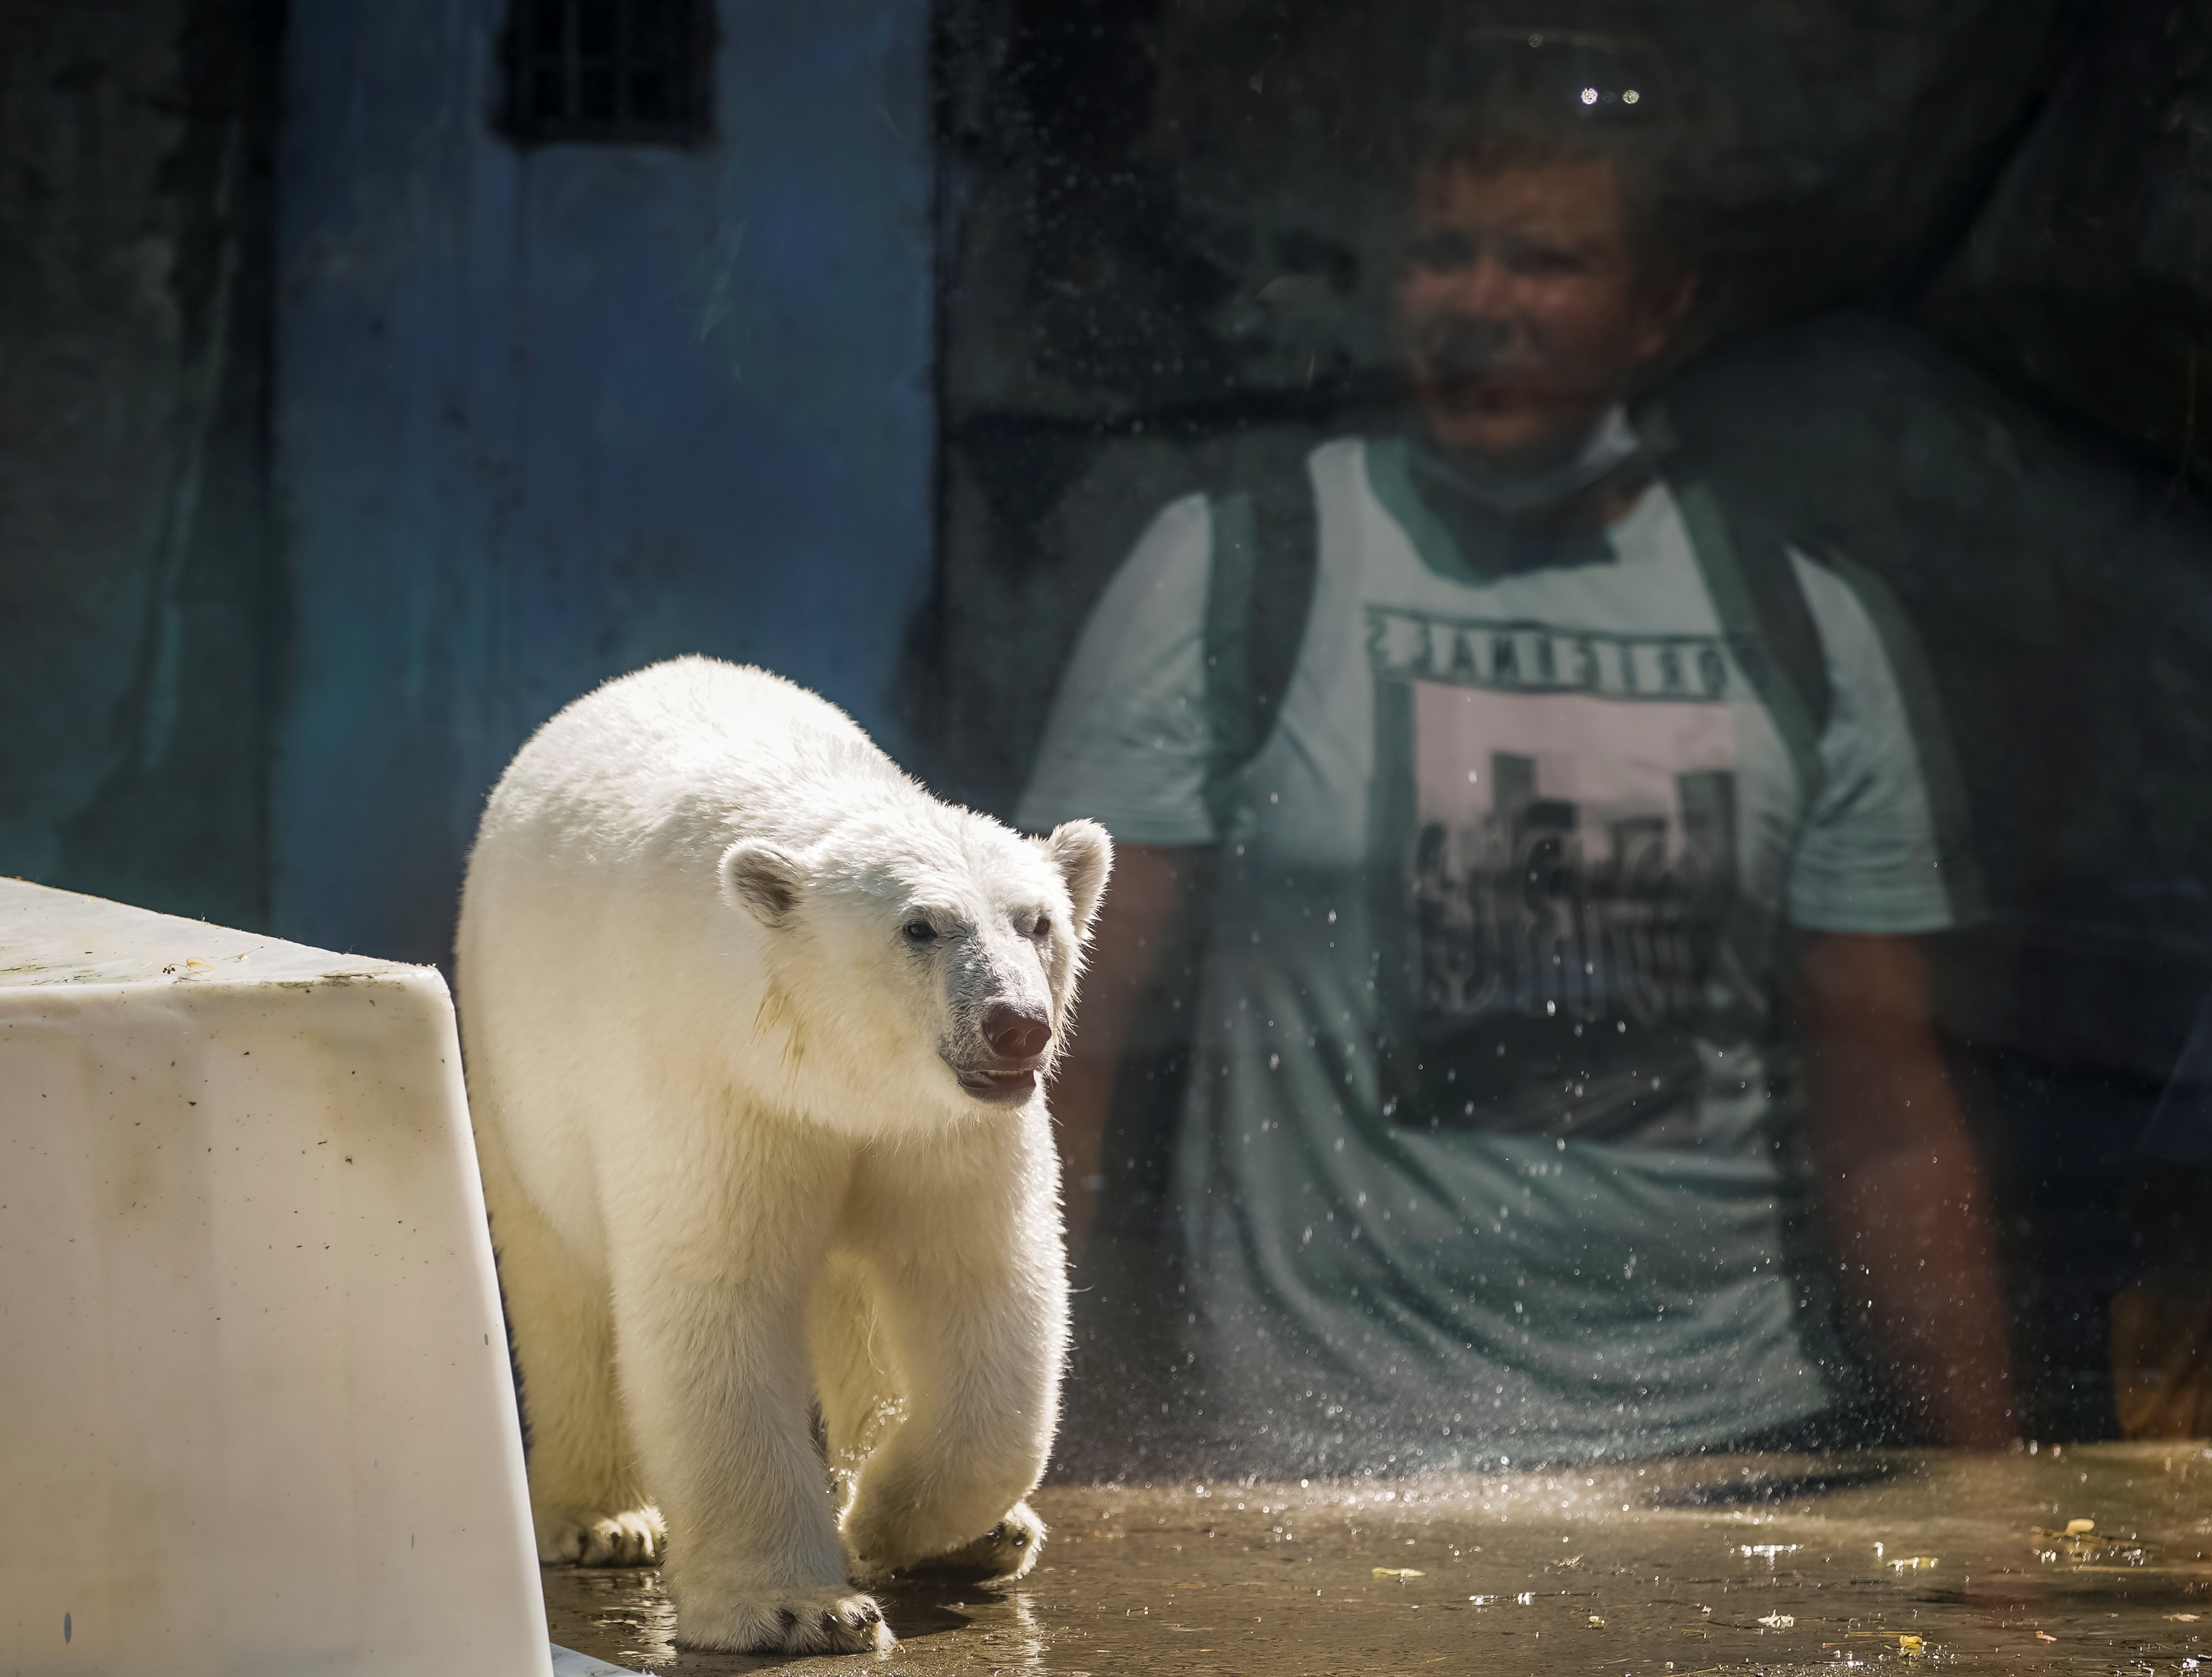 A visitor is reflected in a glass as a polar bear cools off during a hot summer day in its enclosure at the Moscow Zoo